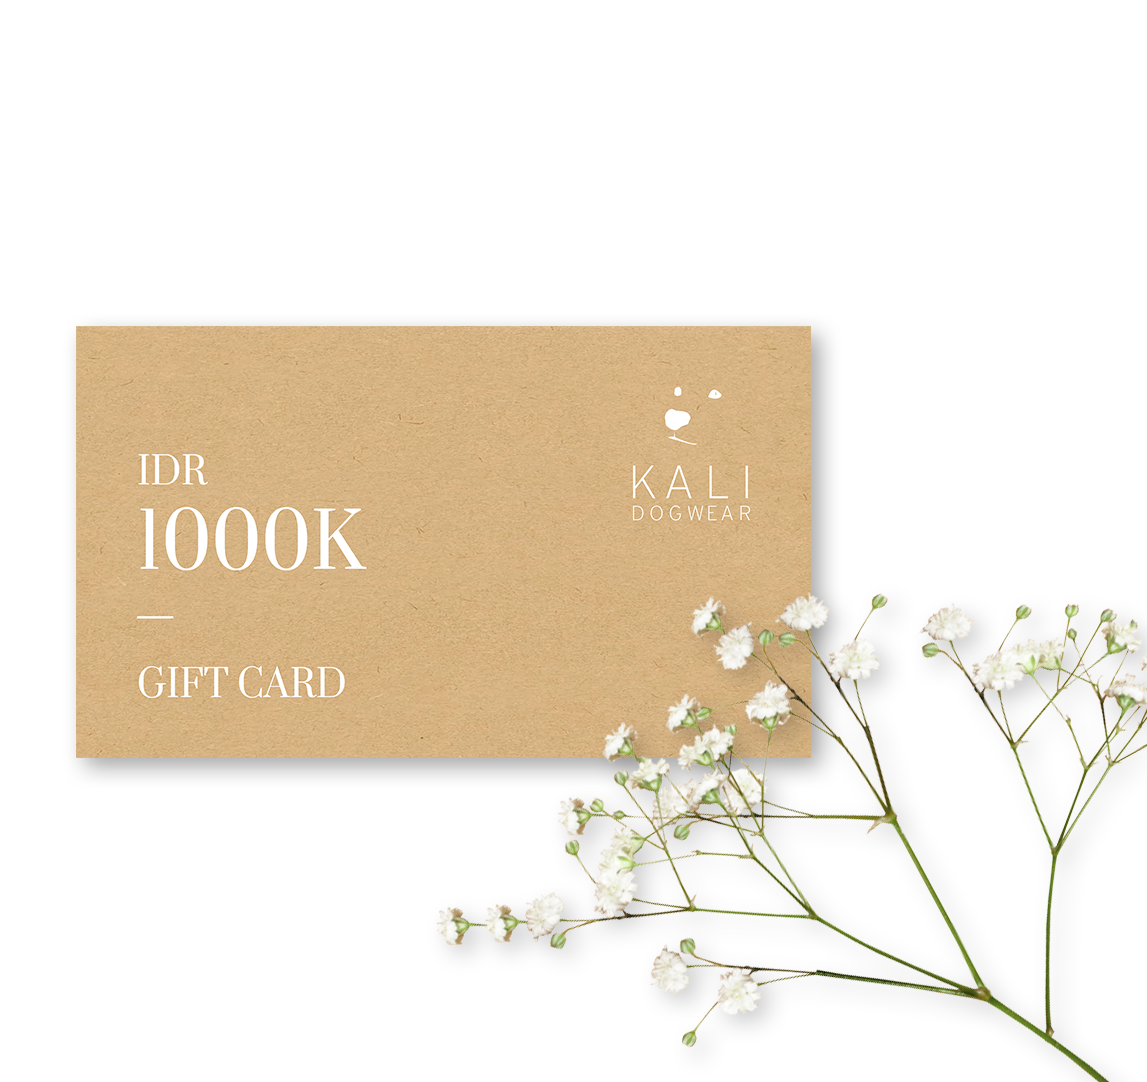 Gift Card physical